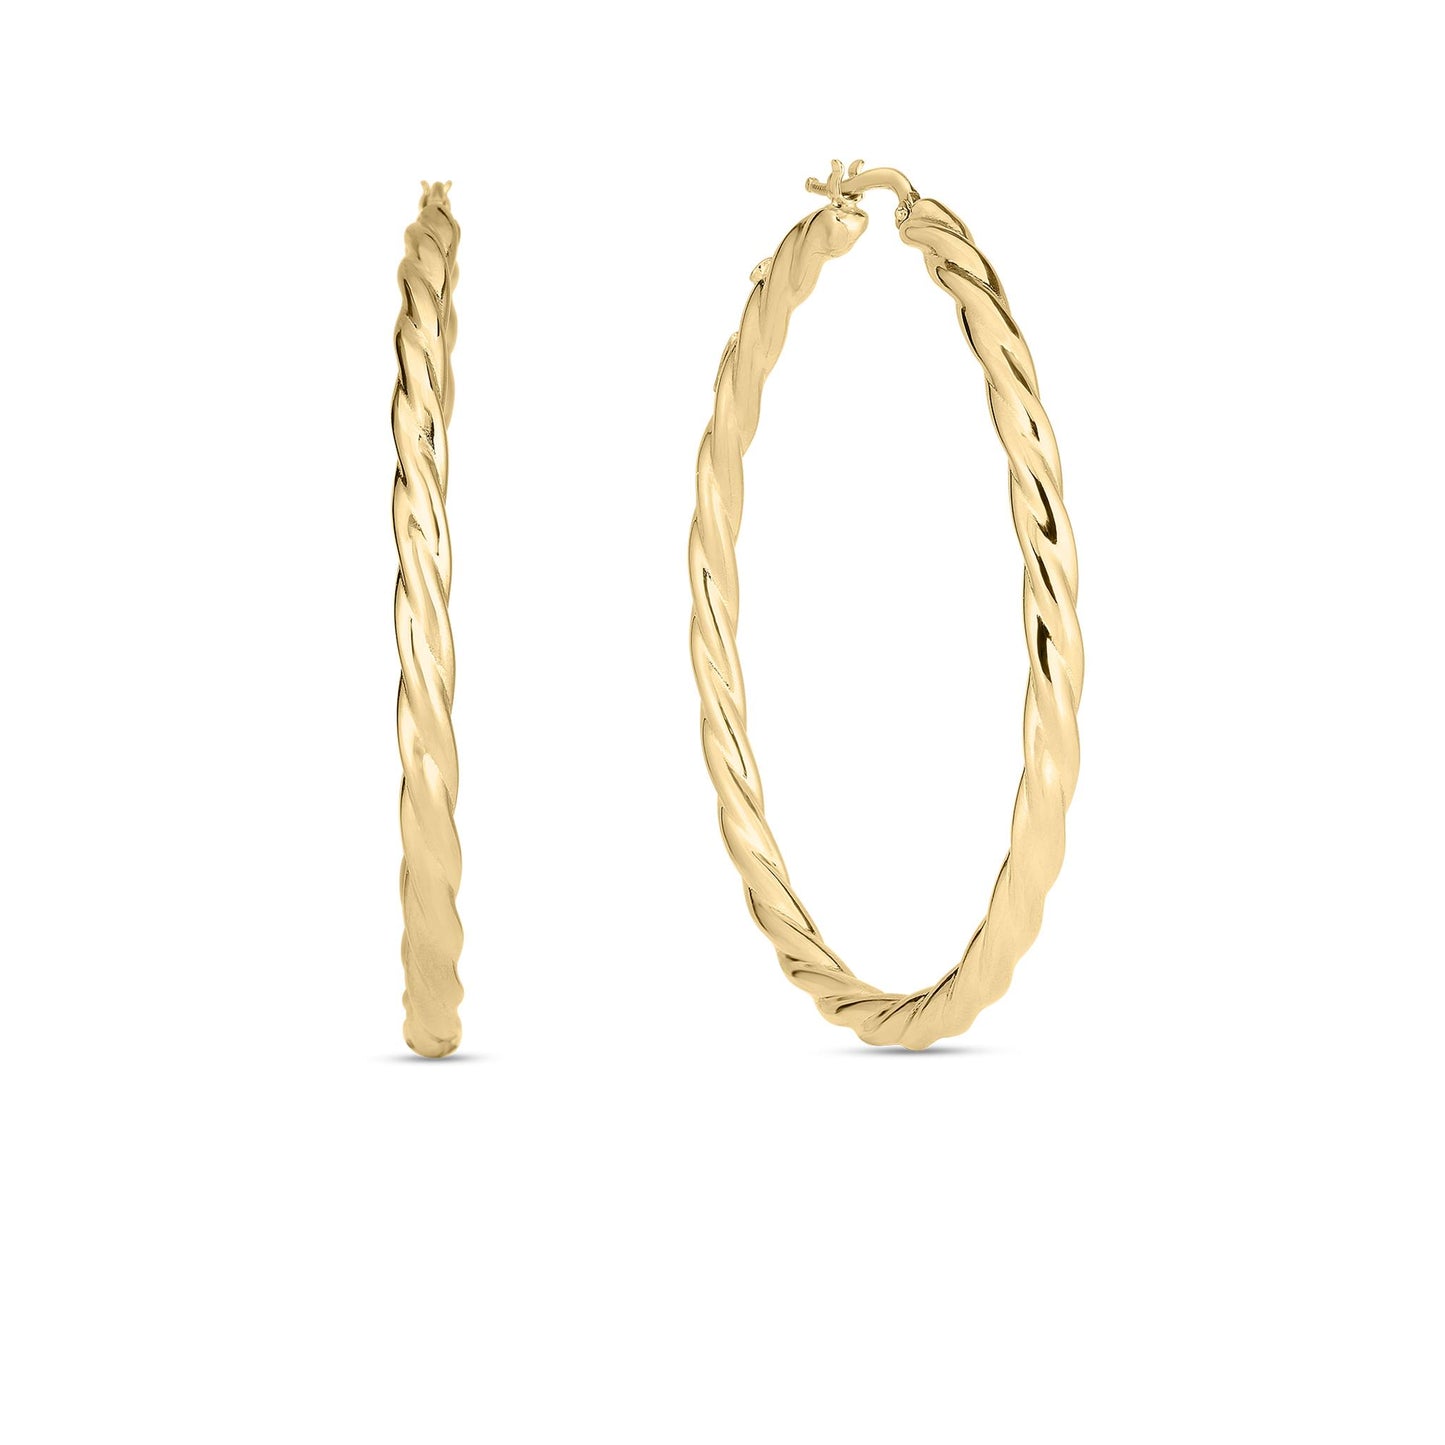 Roberto Coin Gold Twisted Hoop Earrings